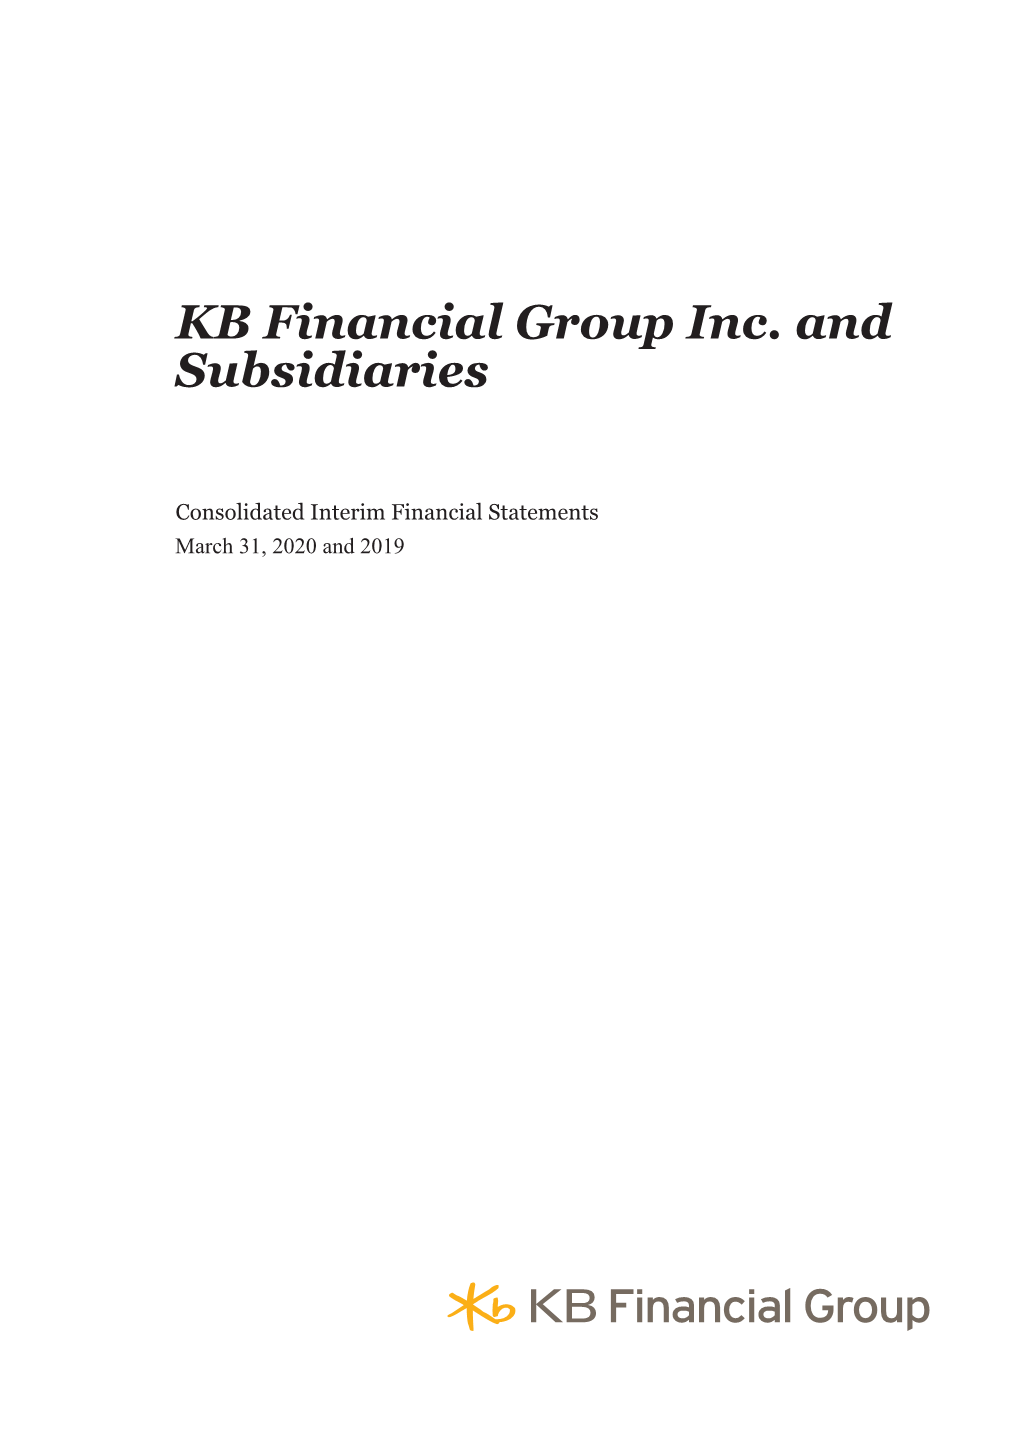 KB Financial Group Inc. and Subsidiaries